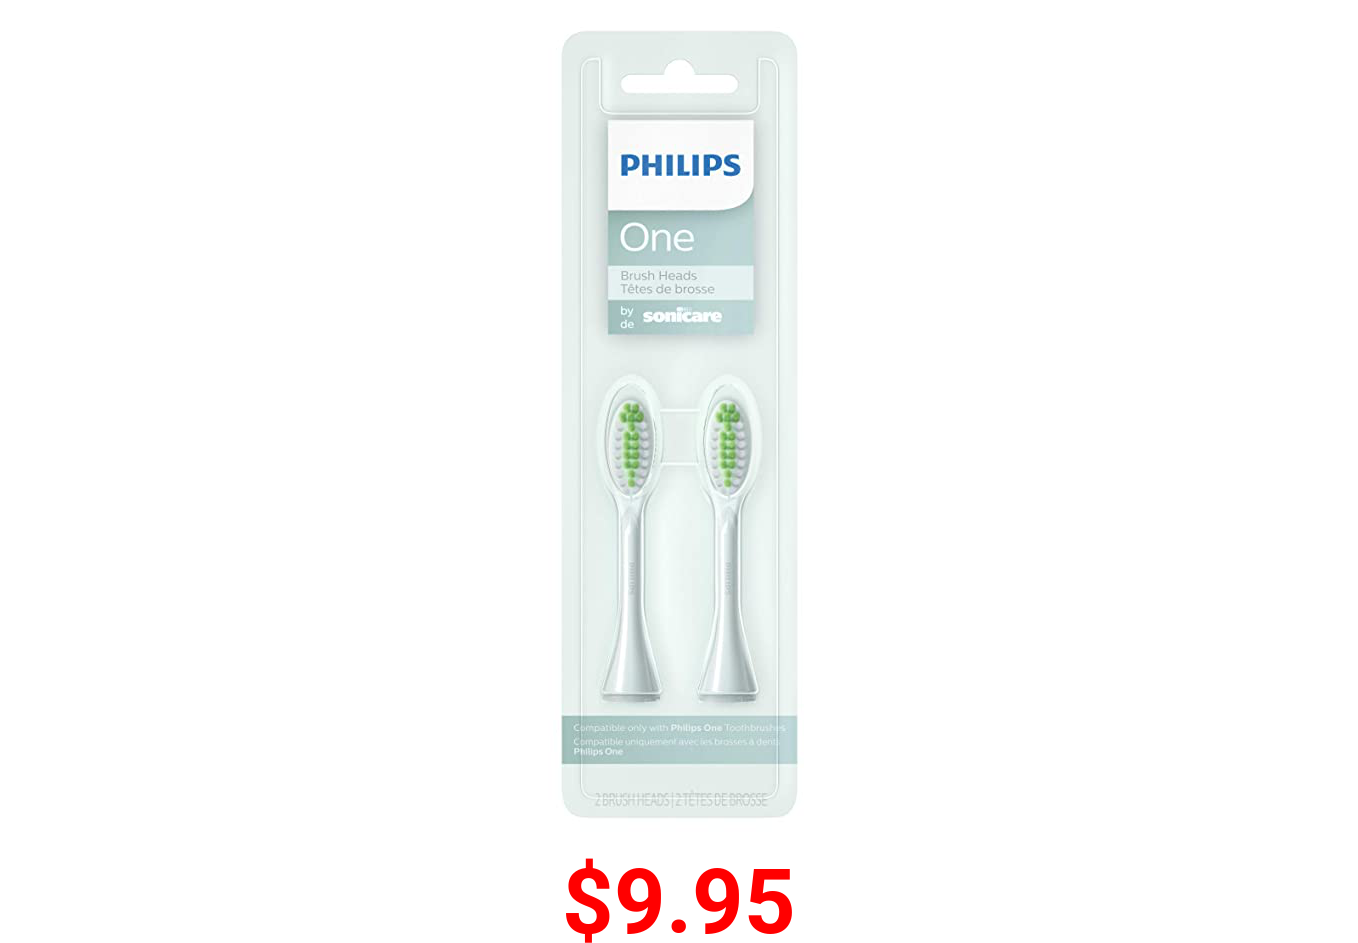 Philips One By Sonicare, 2 Brush Heads, Mint Light Blue, BH1022/03